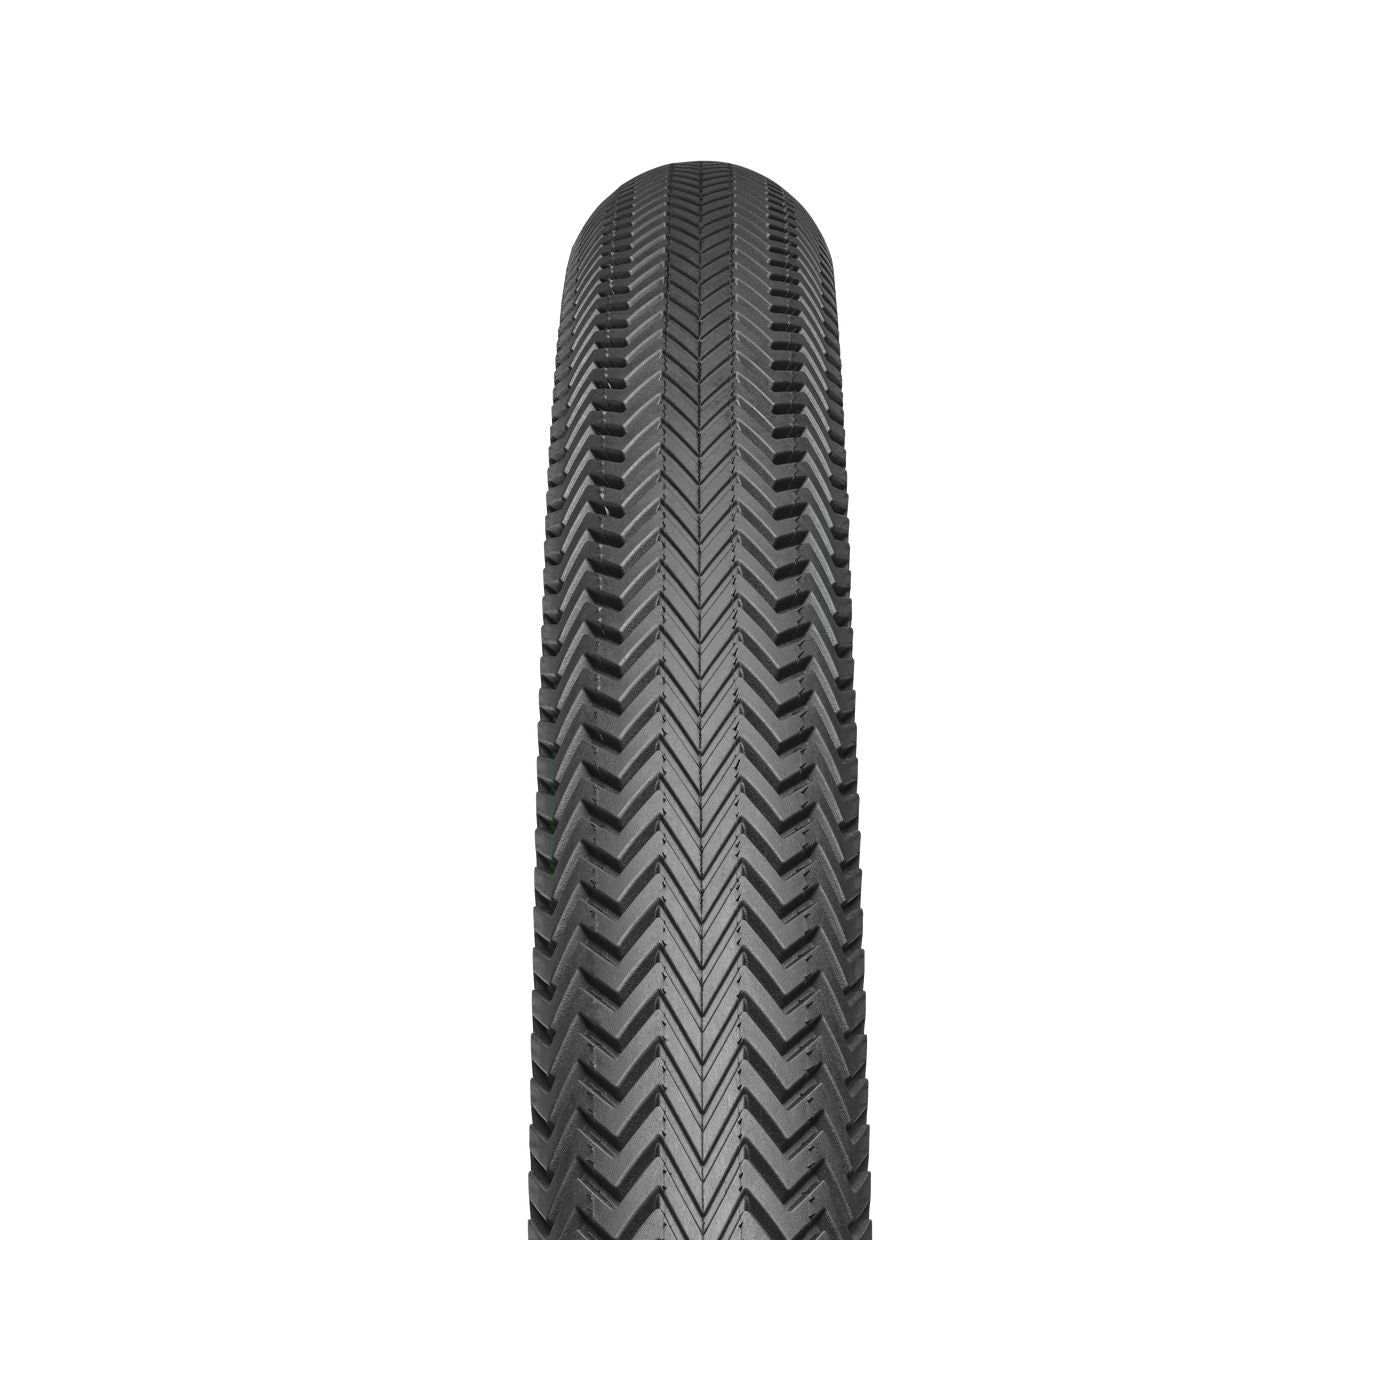 Specialized Sawtooth Sport 700c Tire - Tires - Bicycle Warehouse